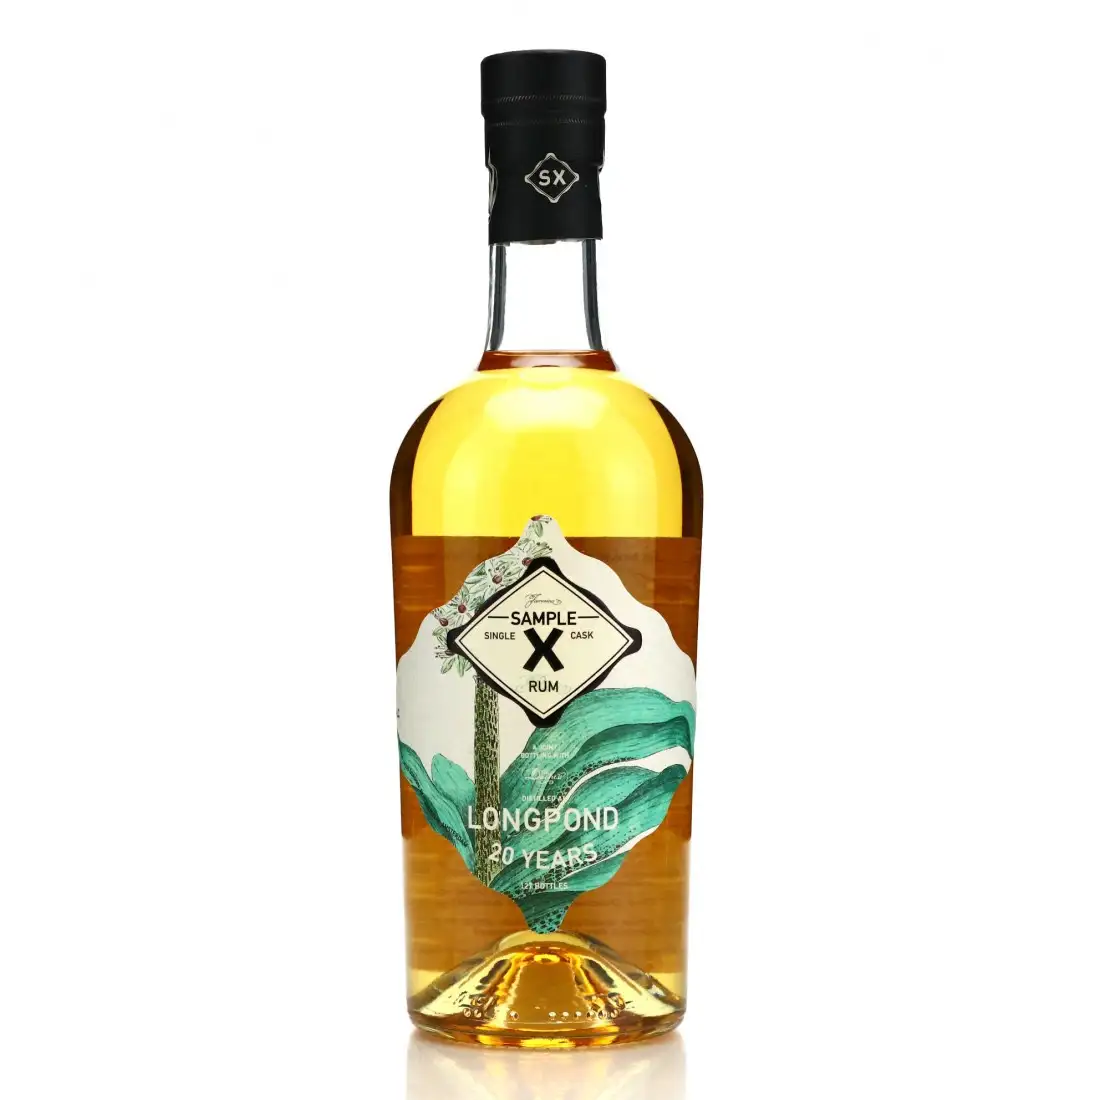 Image of the front of the bottle of the rum Sample X LongPond LPS